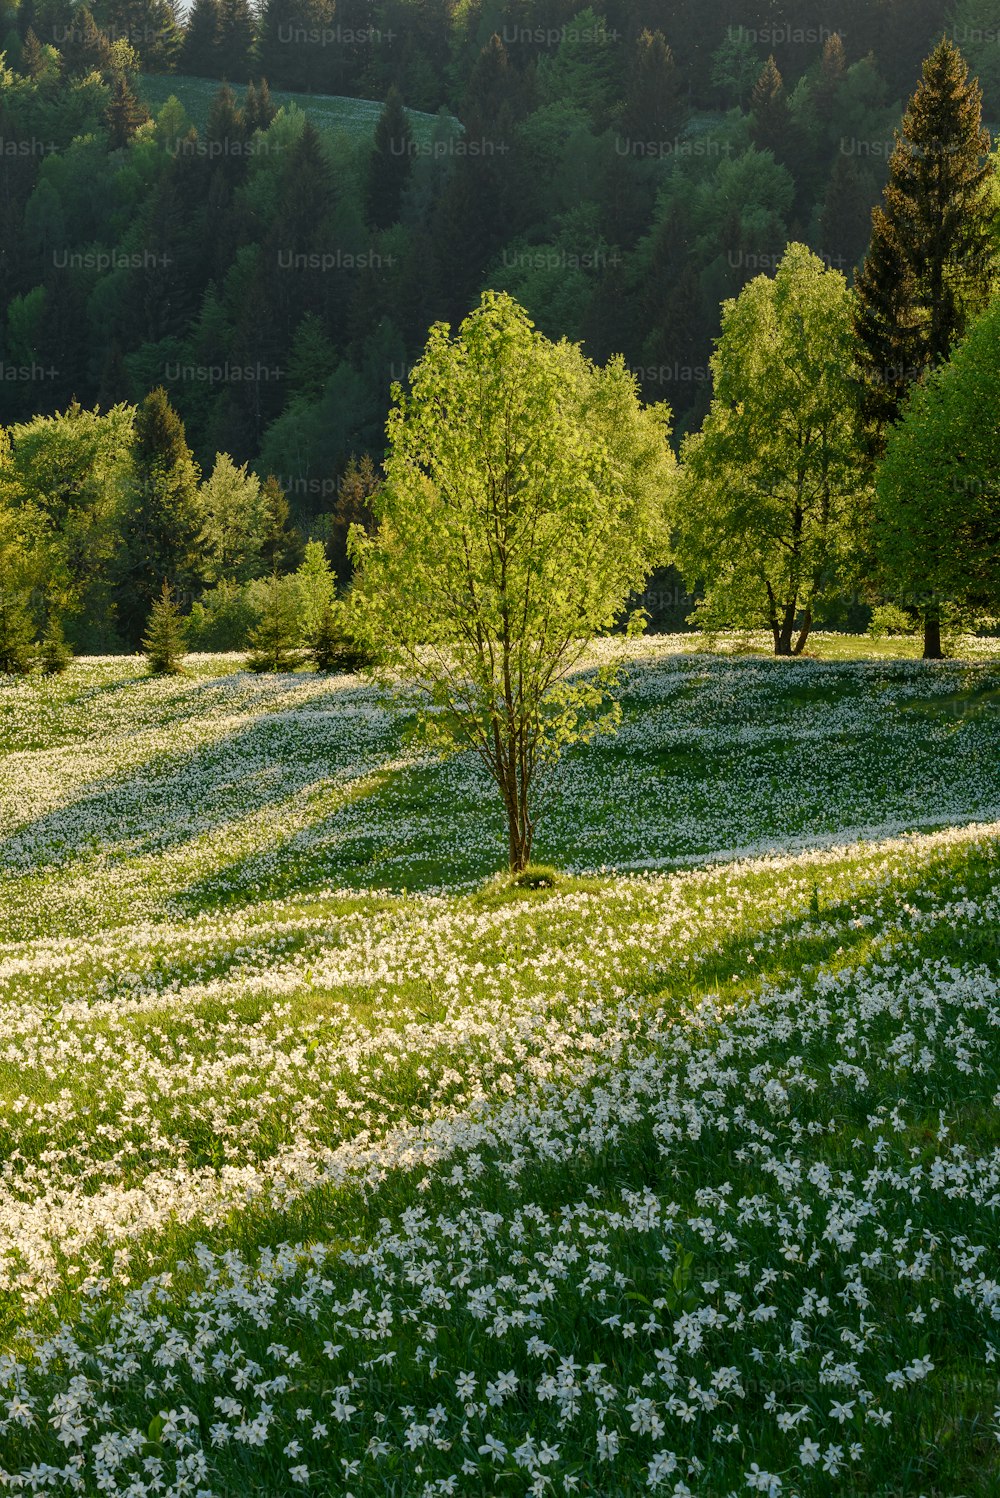 a field full of white flowers with trees in the background